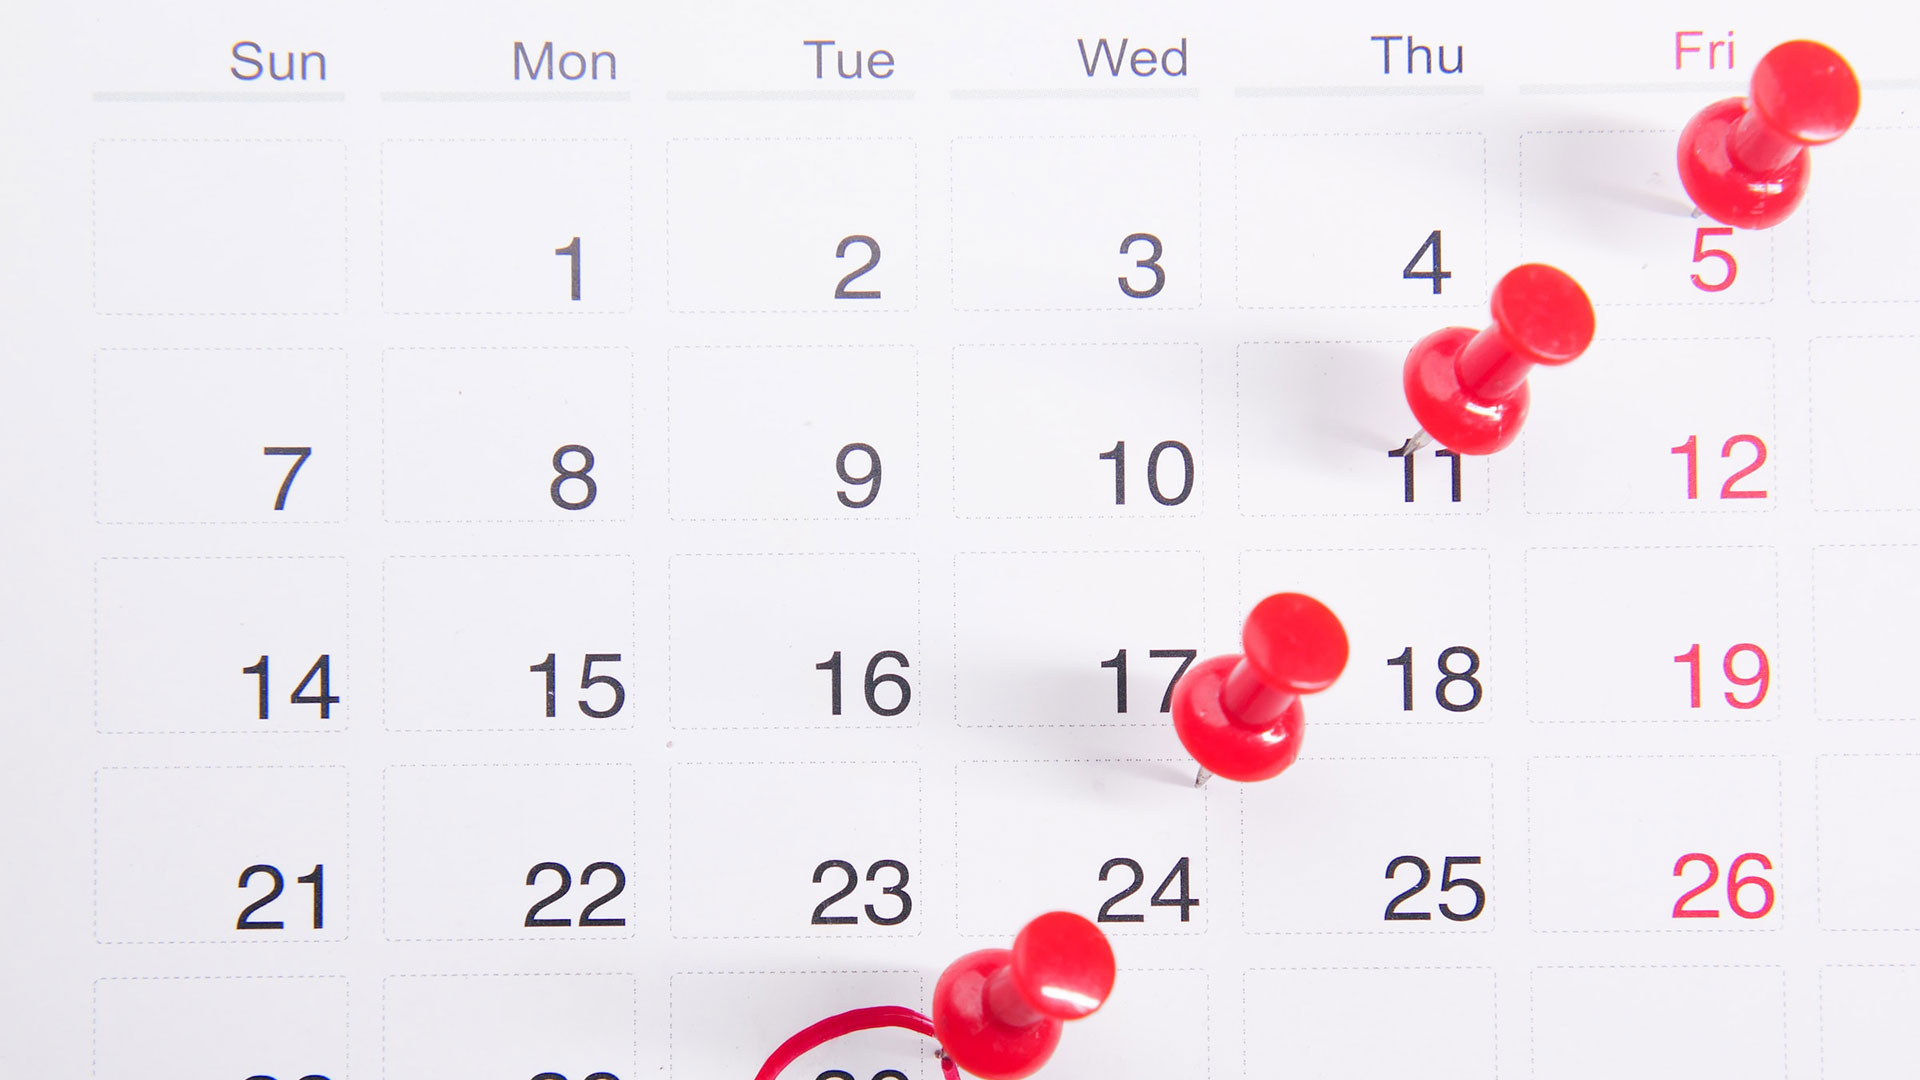 A calendar featuring the days of the week with four thumb tacks highlighting key dates